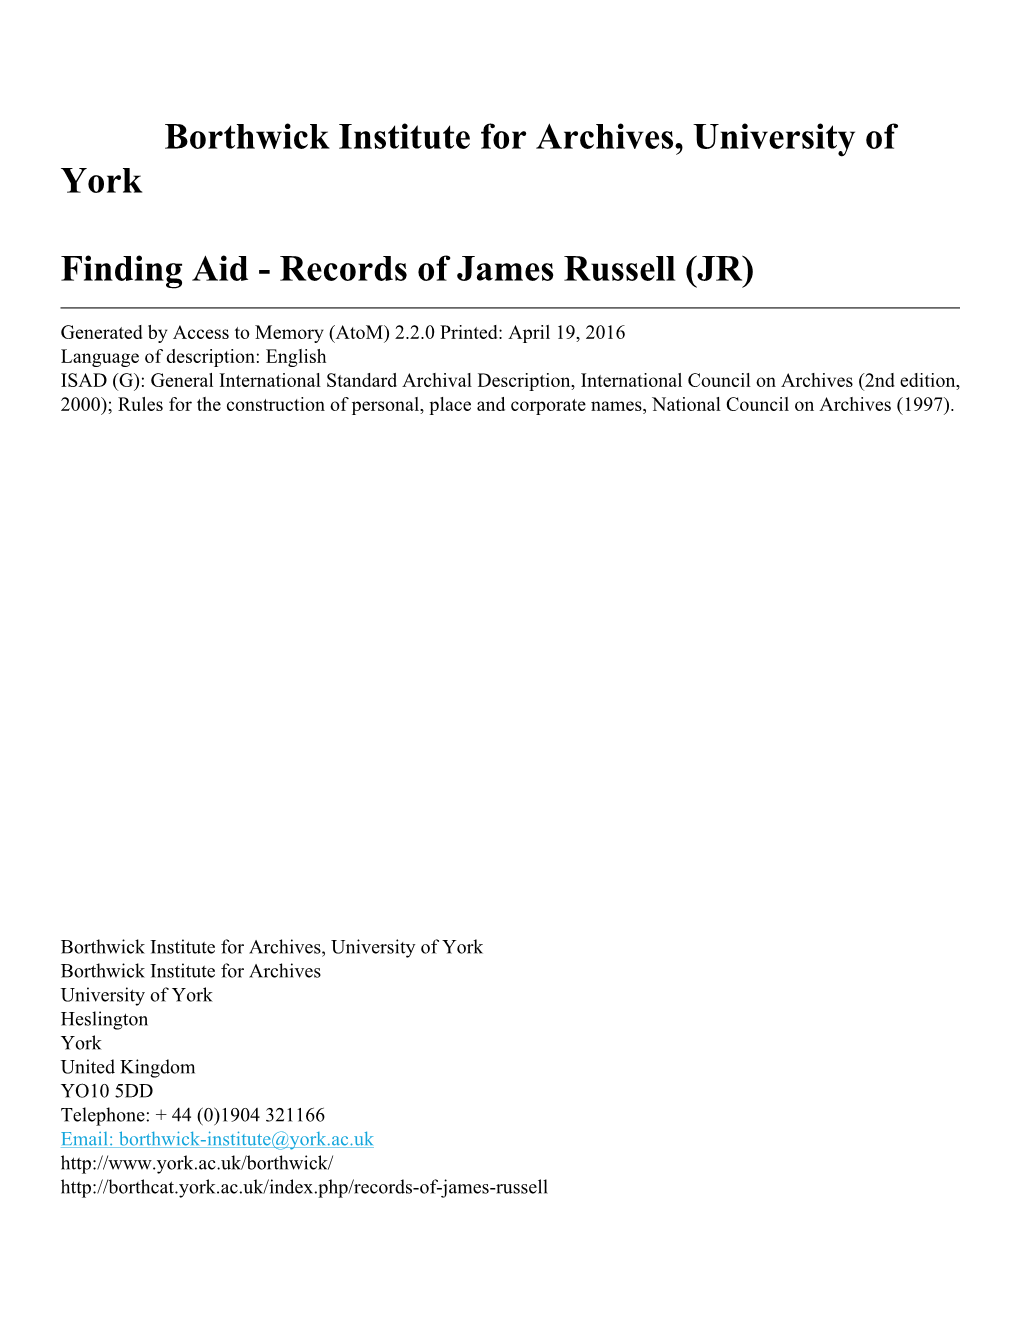 Records of James Russell (JR)